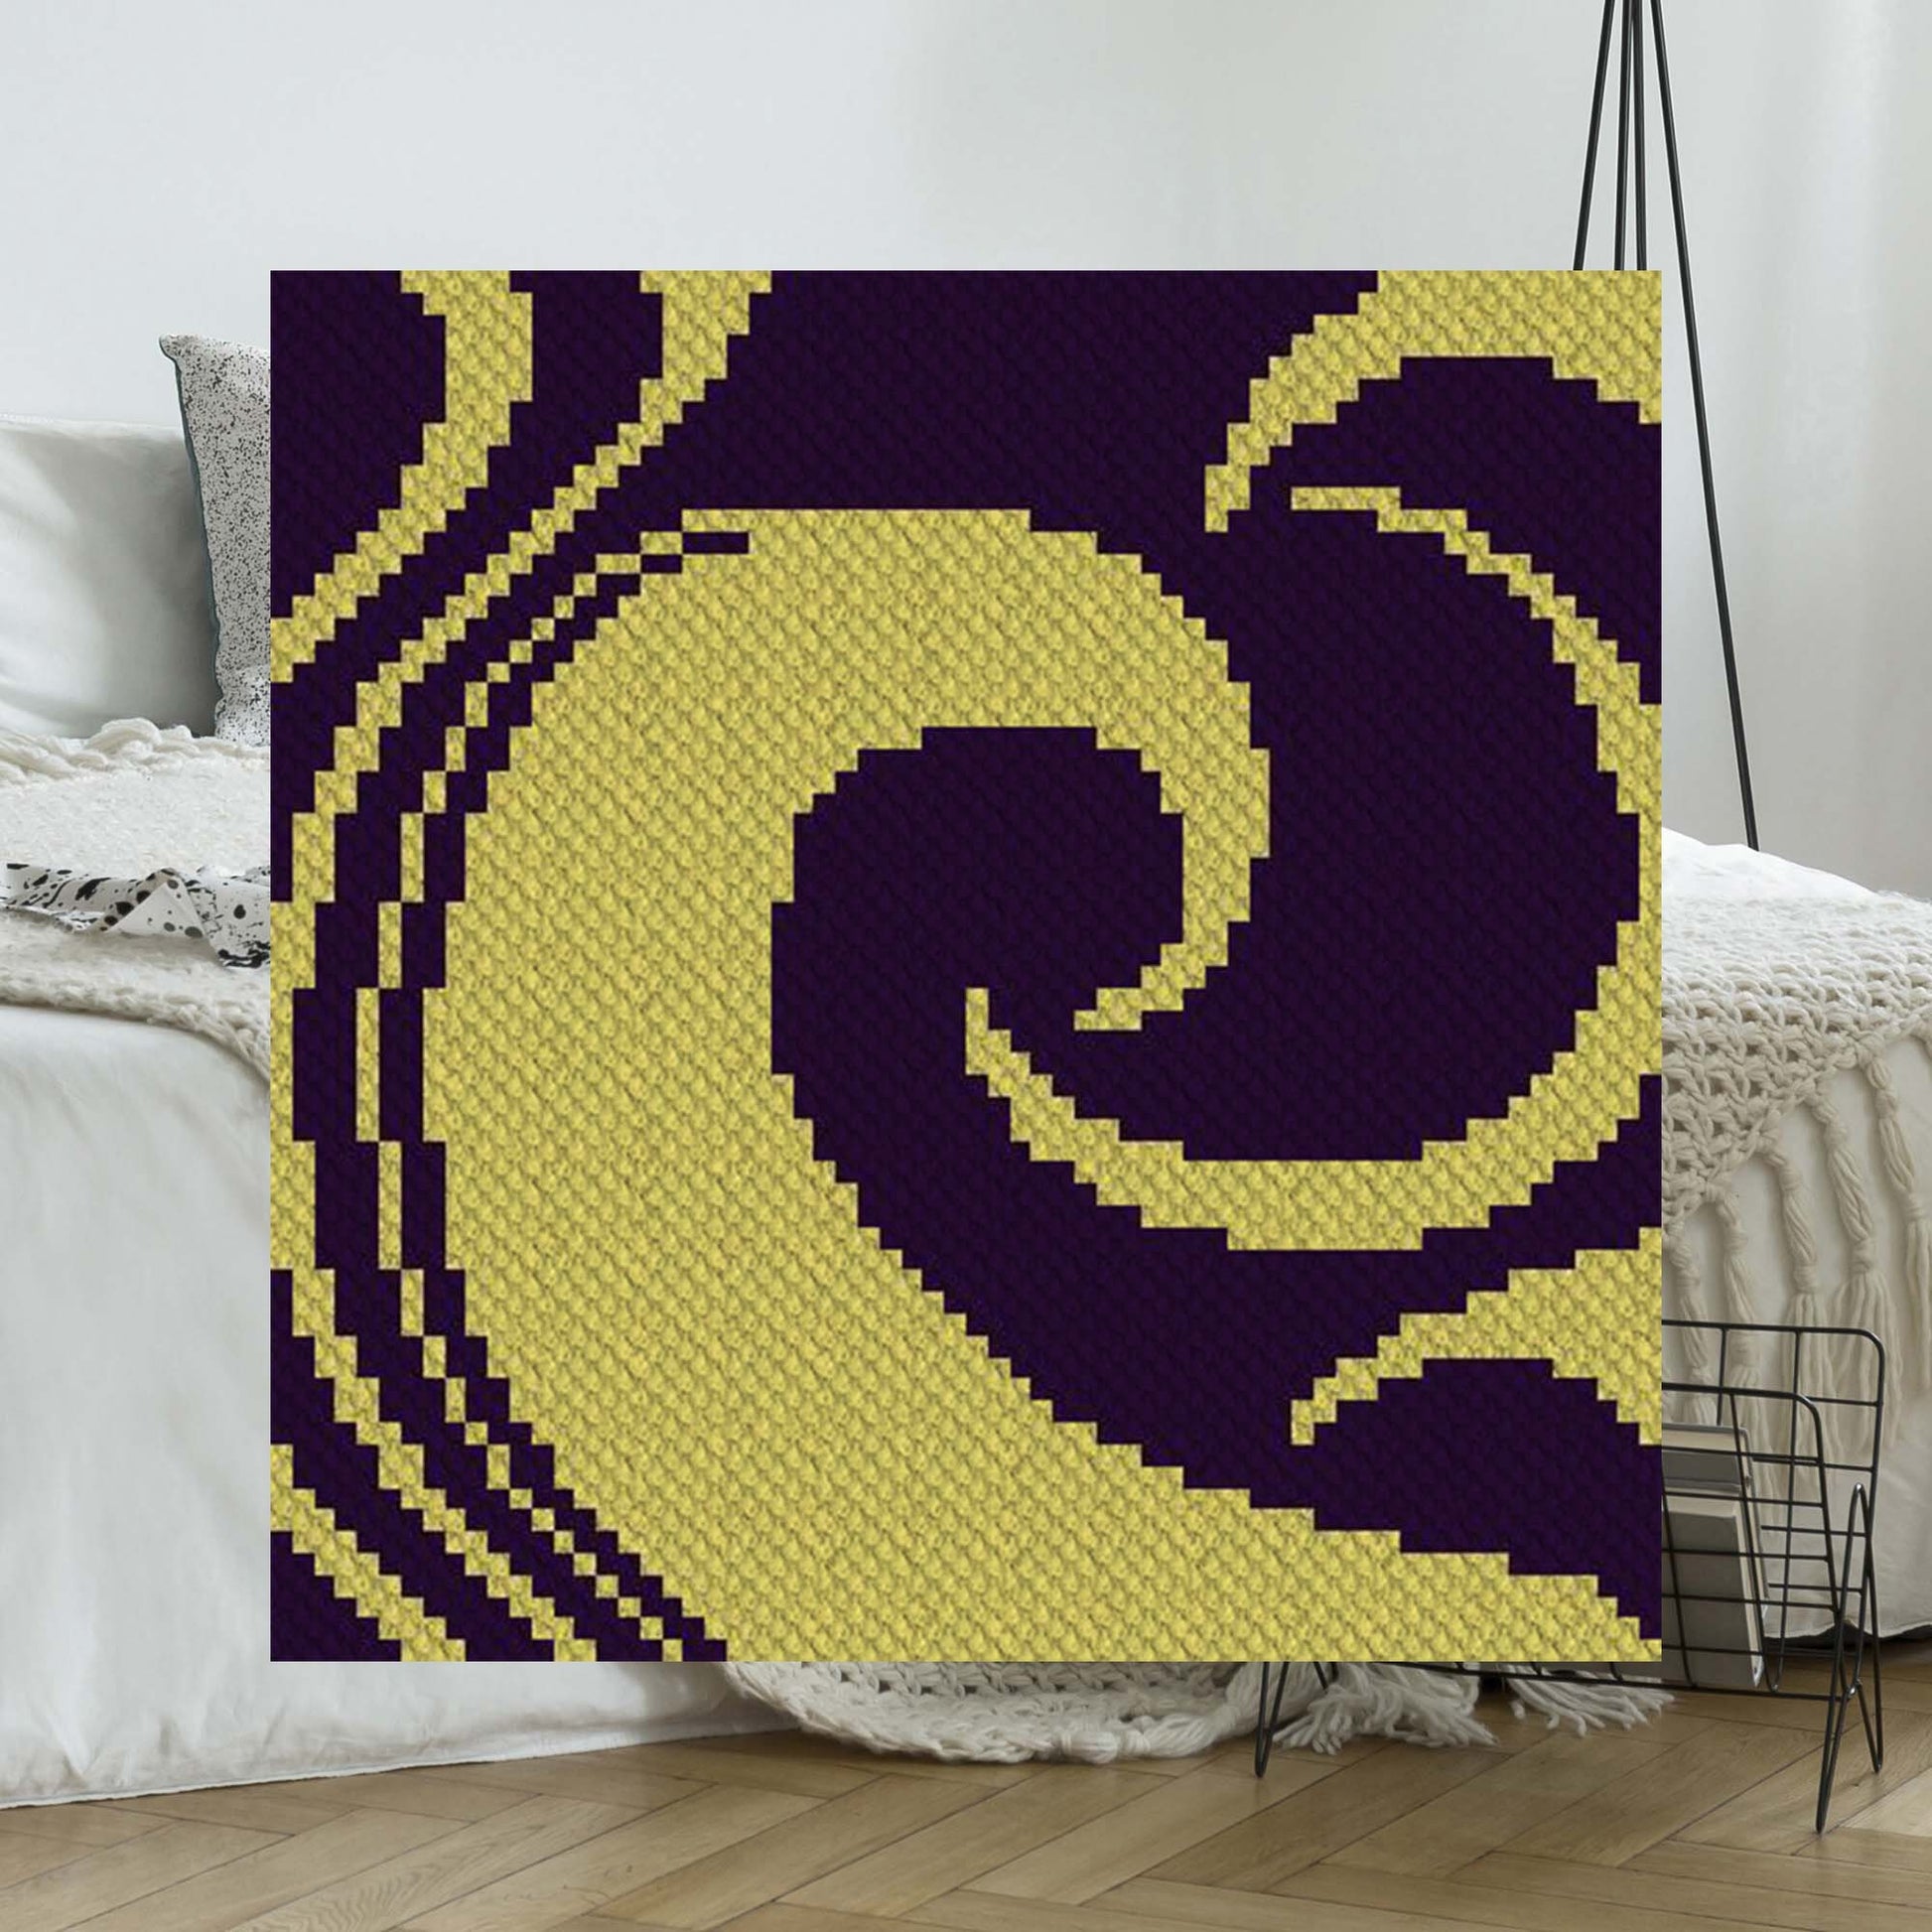 Into the Night C2C Crochet Afghan Pattern